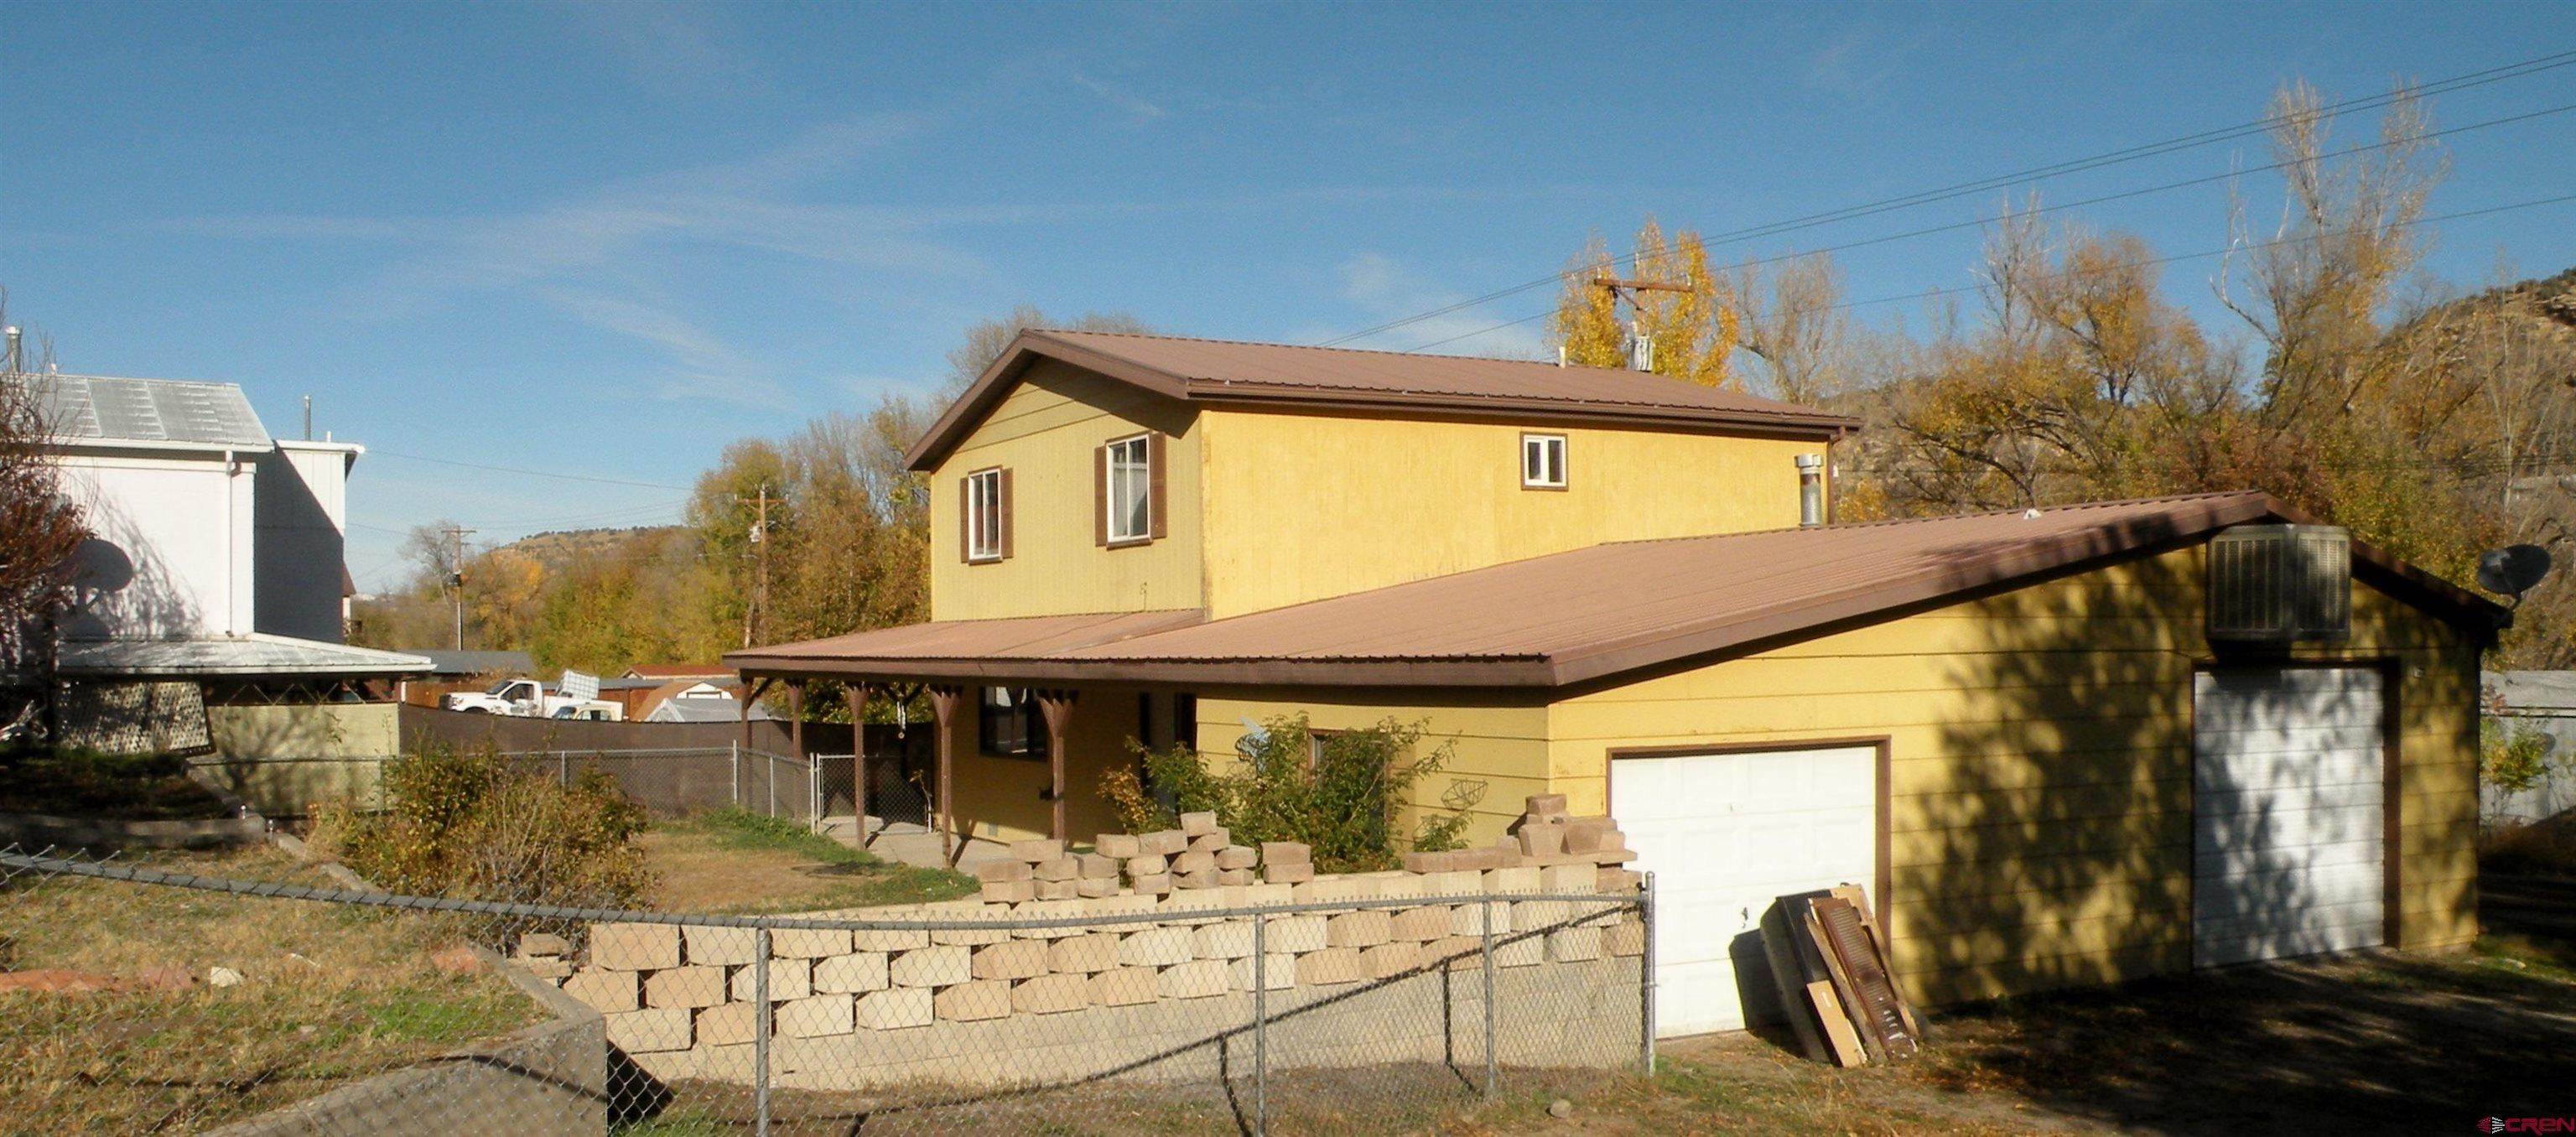 Single Family Homes for Active at 105 E 2nd Street Naturita, Colorado 81422 United States